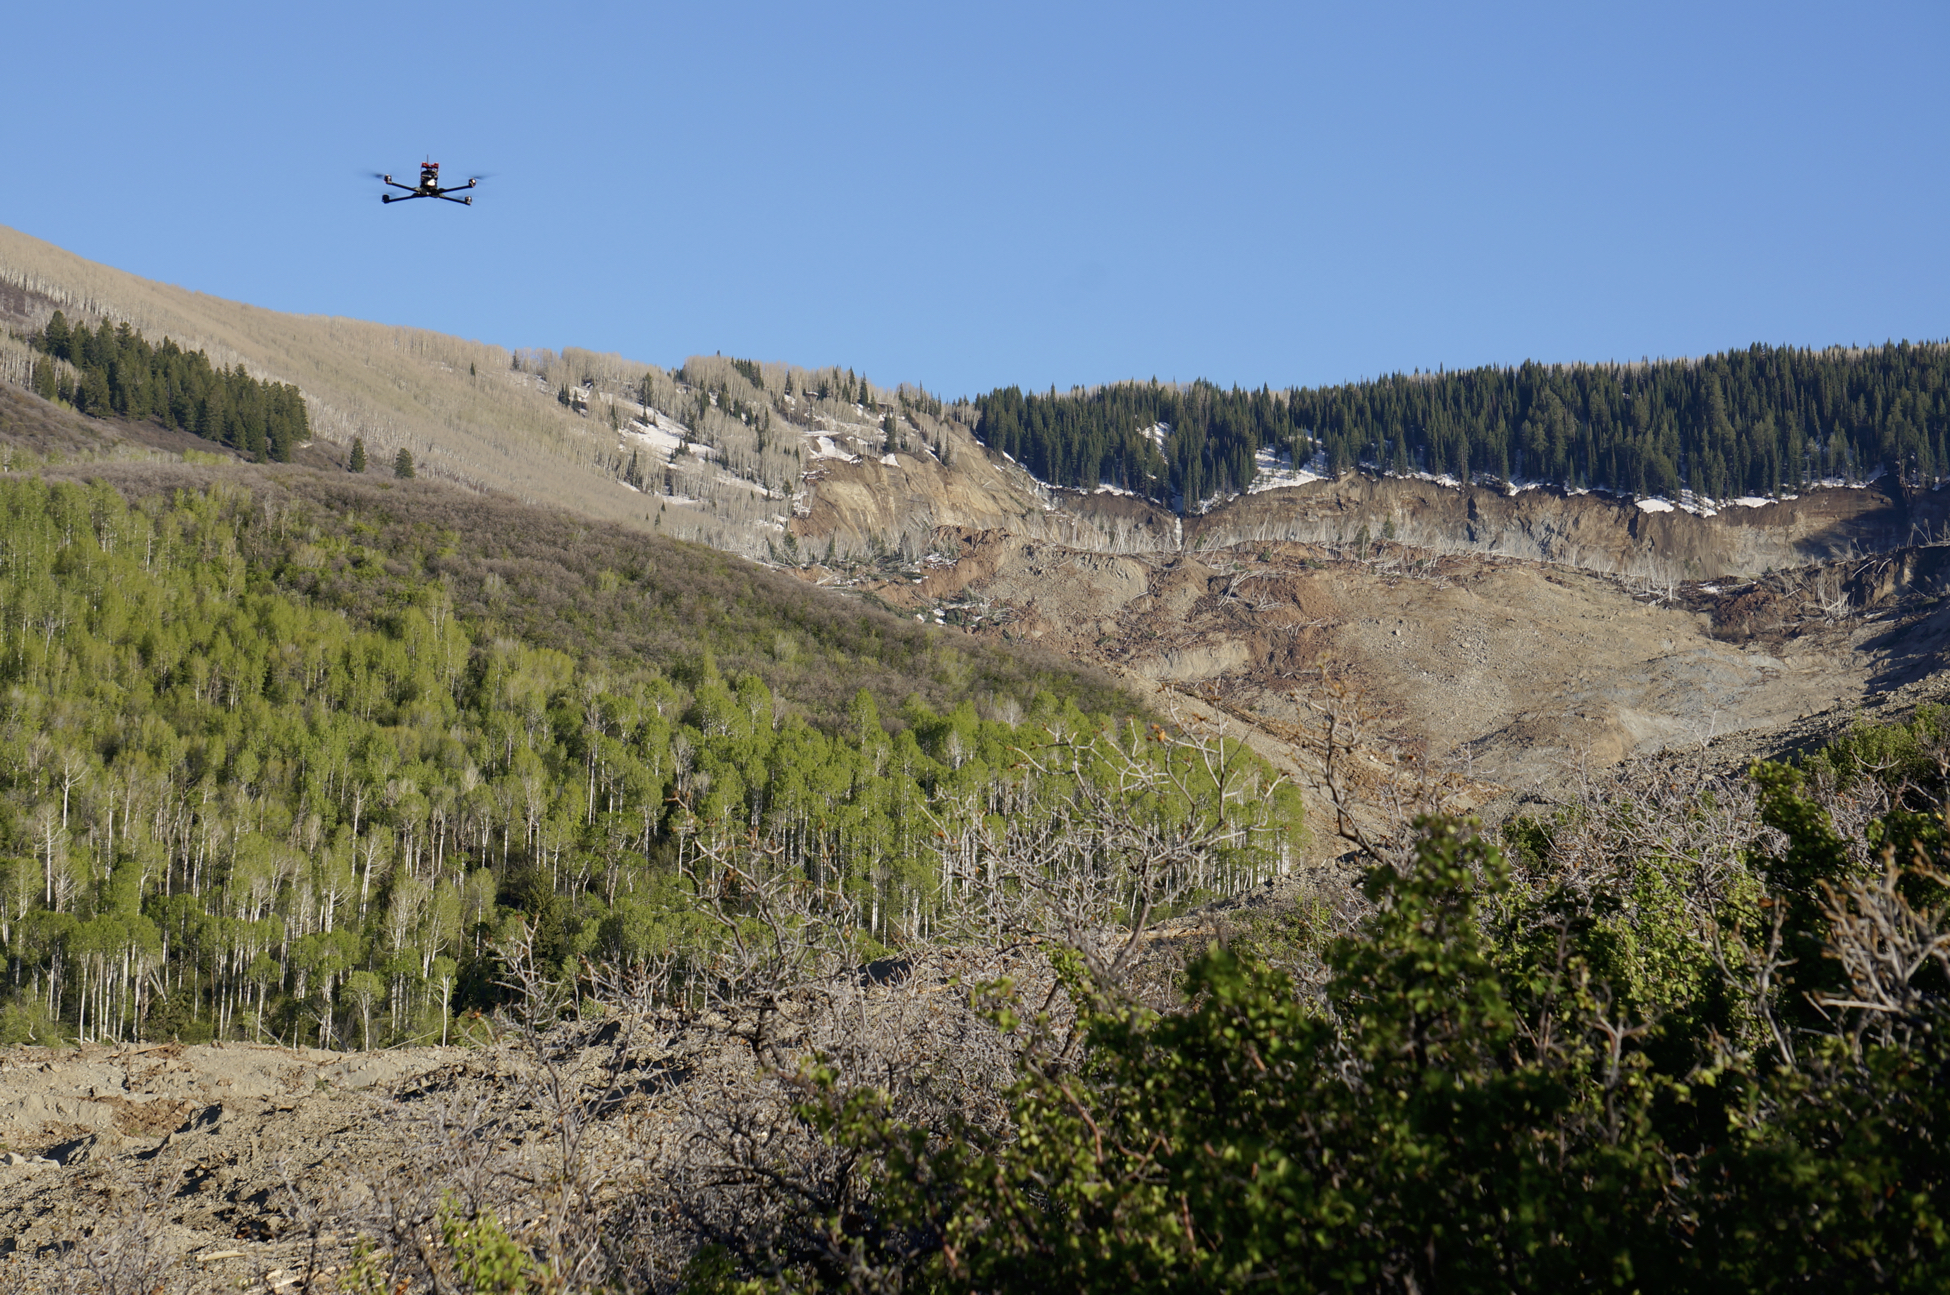 UAS flying over the West Salt Creek landslide on May 26, 2014, one day after the landslide occurred. The view is to the south, looking toward the landslide headscarp. Credit: Sheriff’s Office, Mesa County, Colorado. 